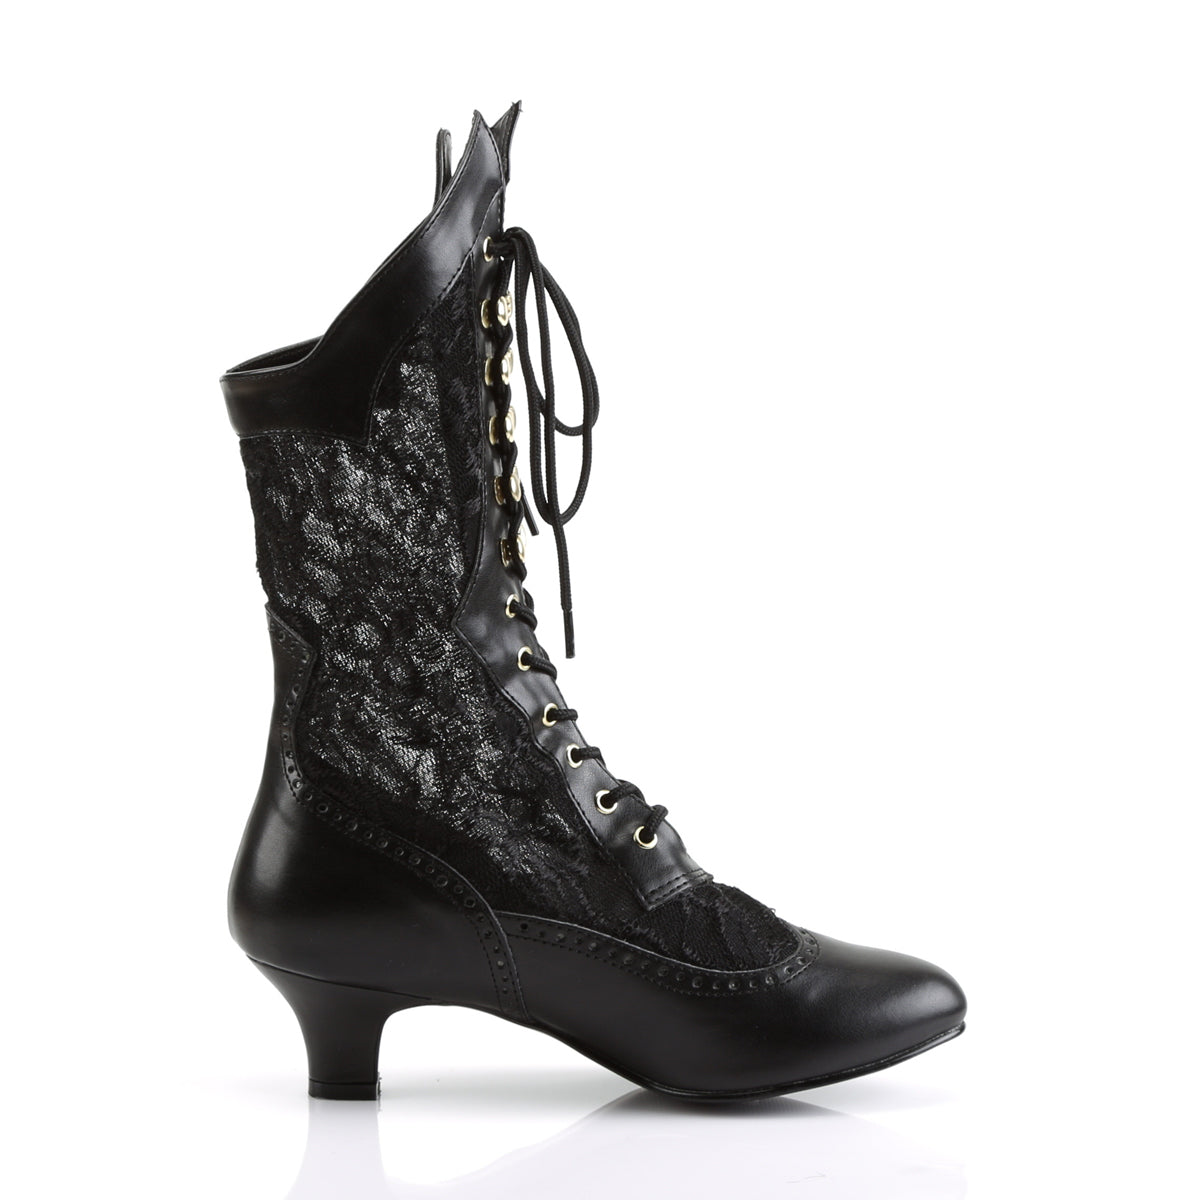 DAME-115 Black Ankle Boots Black Multi view 2